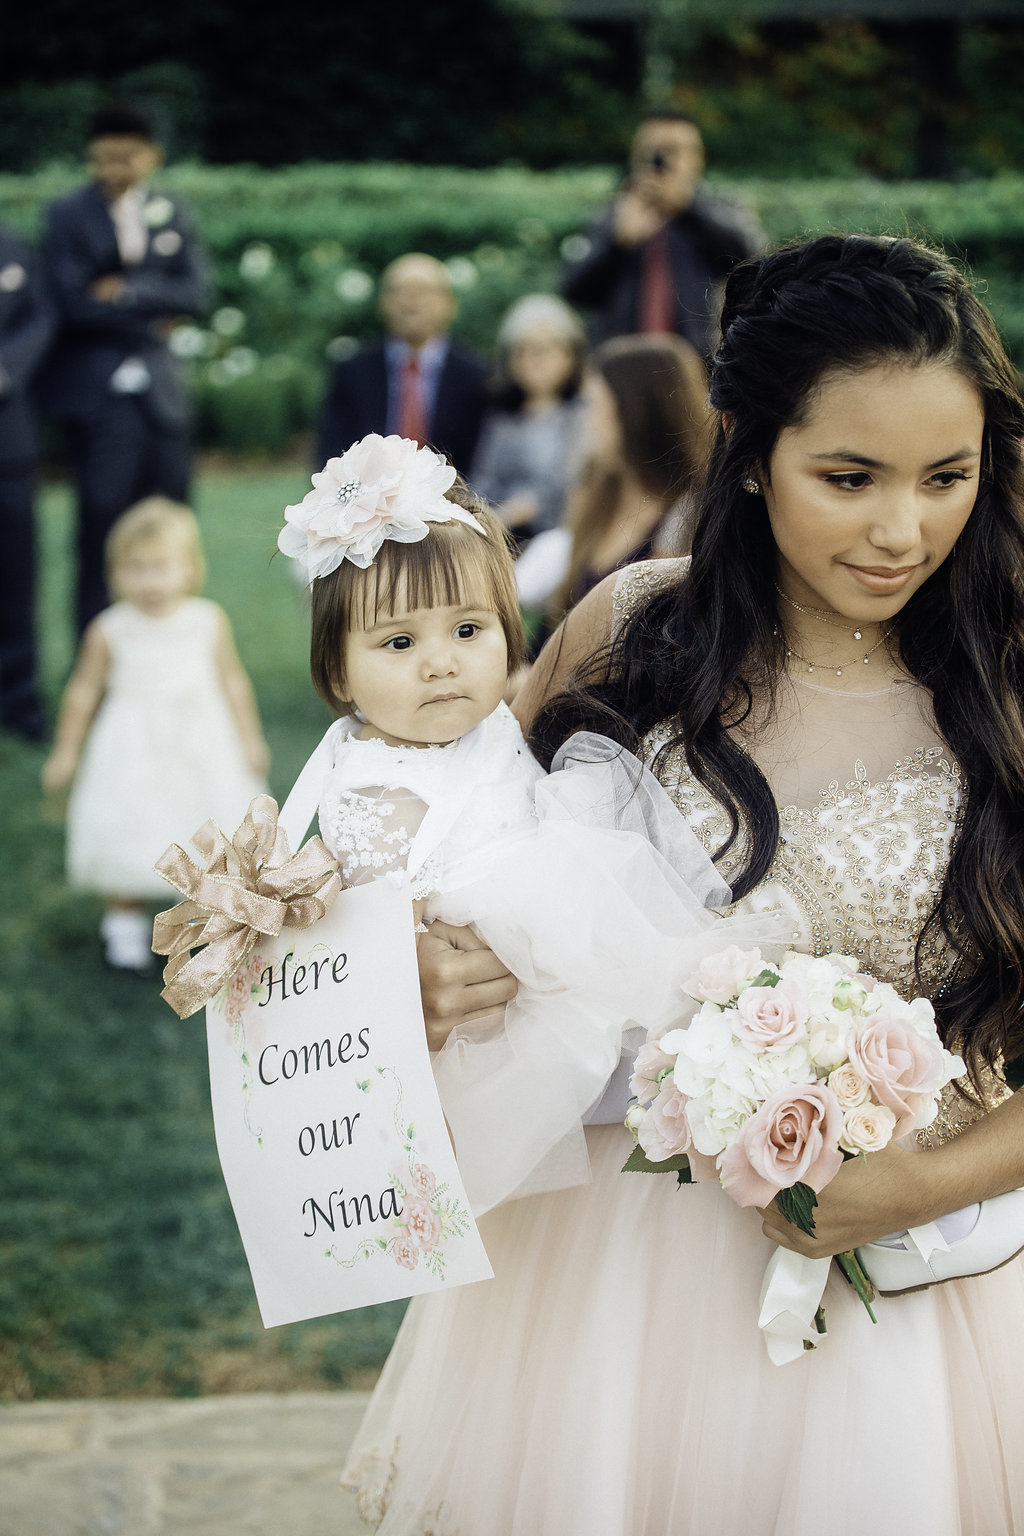 Wedding Photograph Of Woman Carrying a Toddler and a Bouquet While Walking Los Angeles